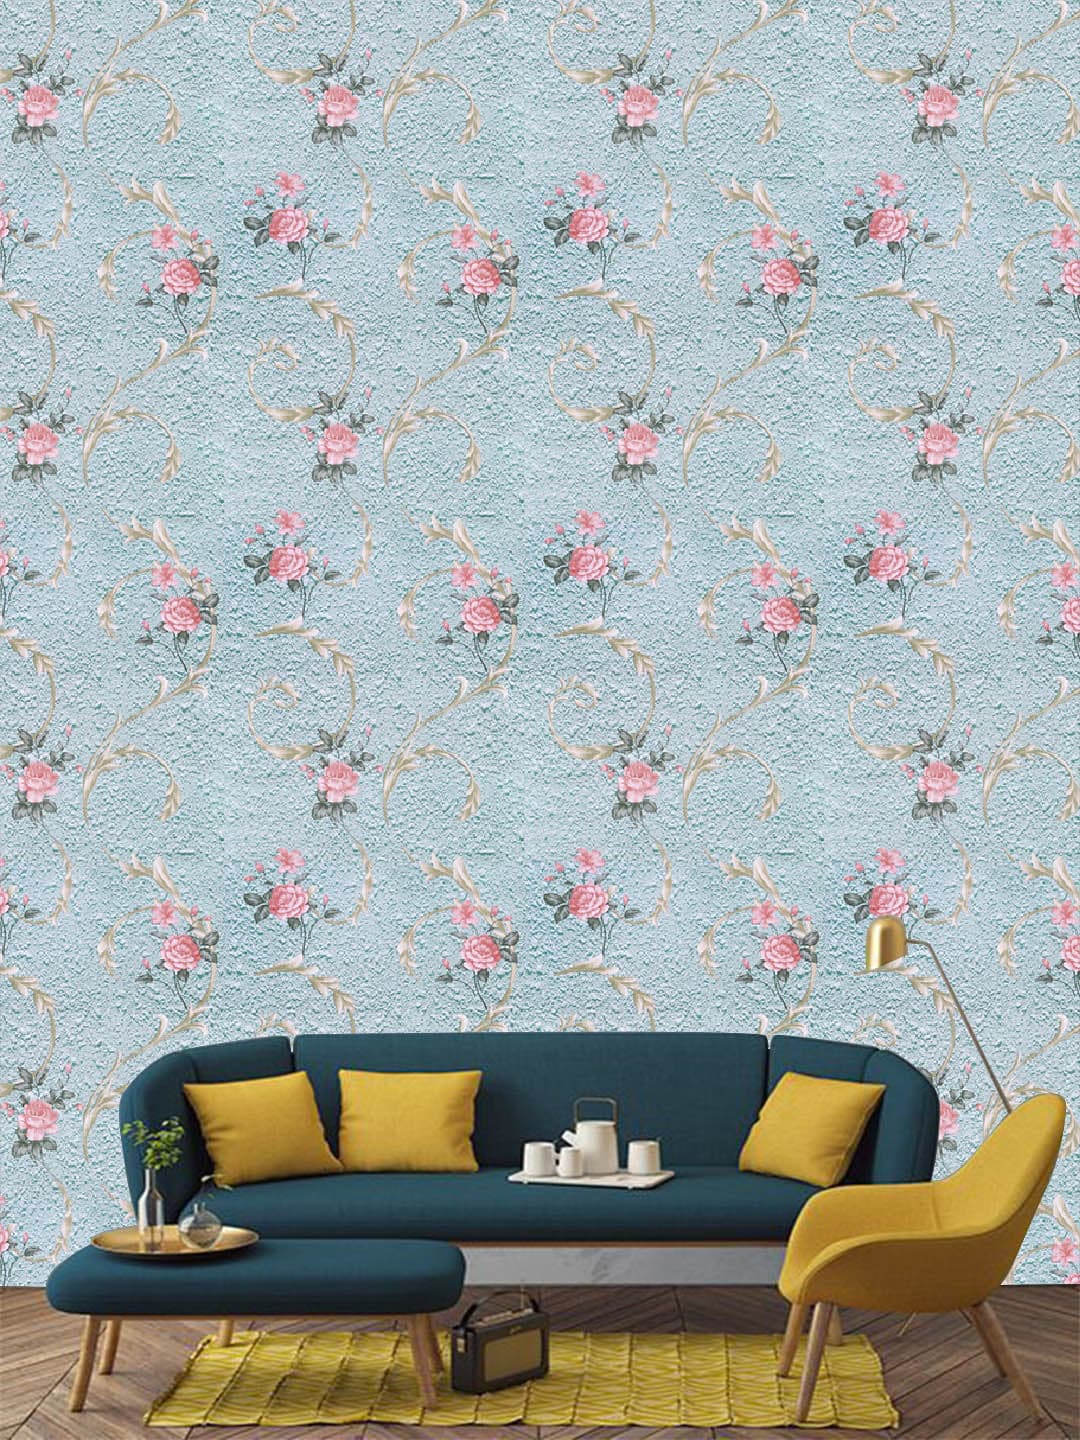 Jaamso Royals Blue & Pink Floral Self Adhesive Removable Wallpaper Price in India